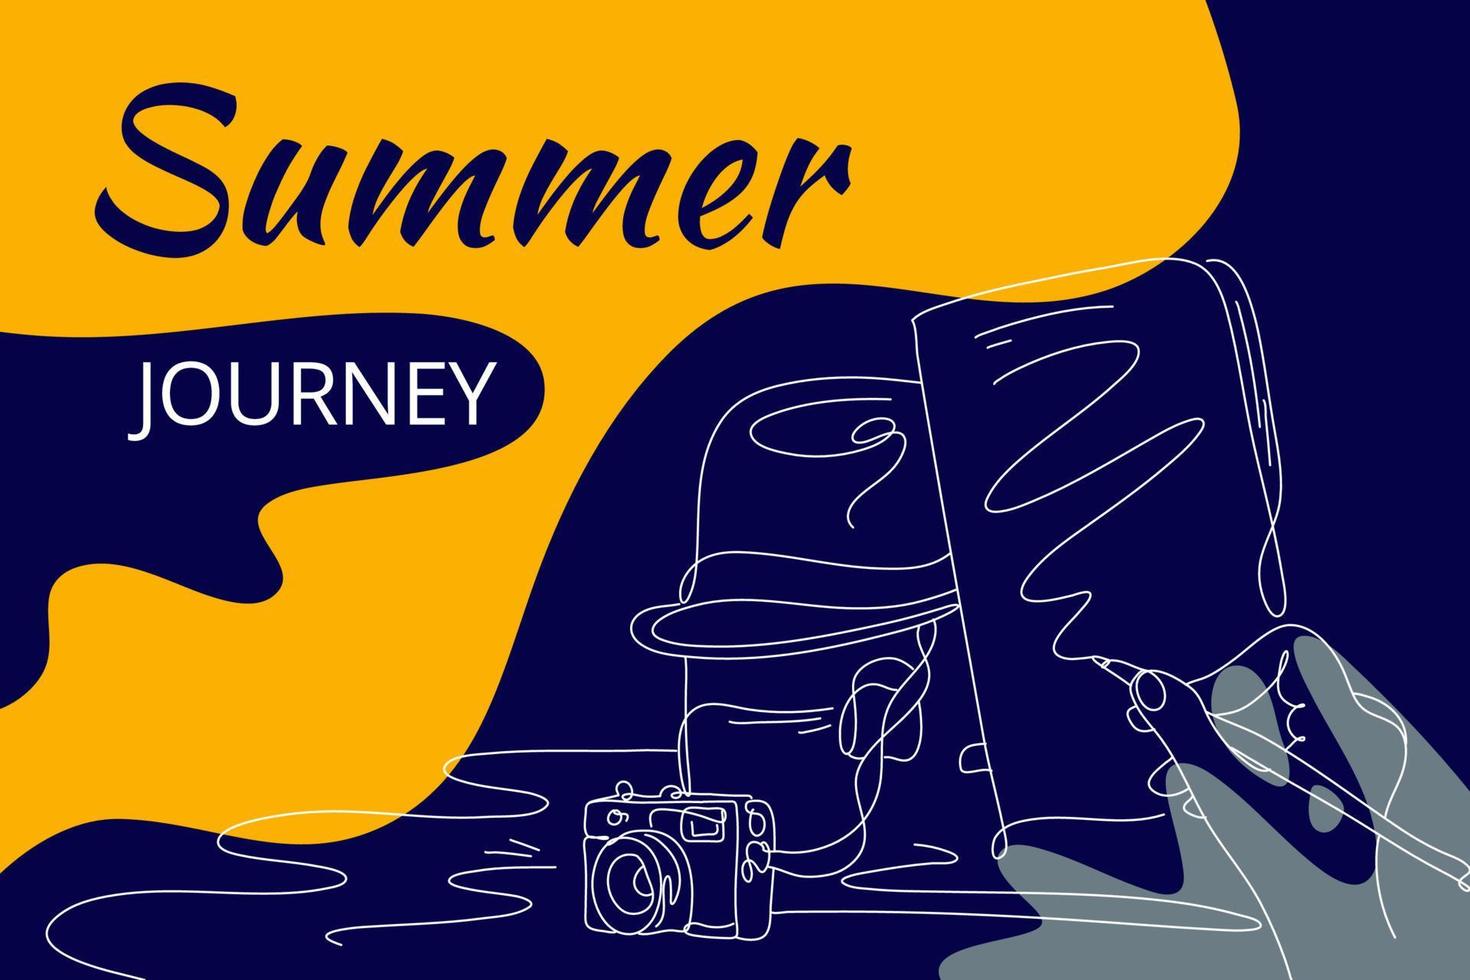 Summer Journey Flat Illustration abstract background line art. Sales promotion material. perfect for social media banner design, poster, email, newsletter, advertisement, placard, brochure, web vector